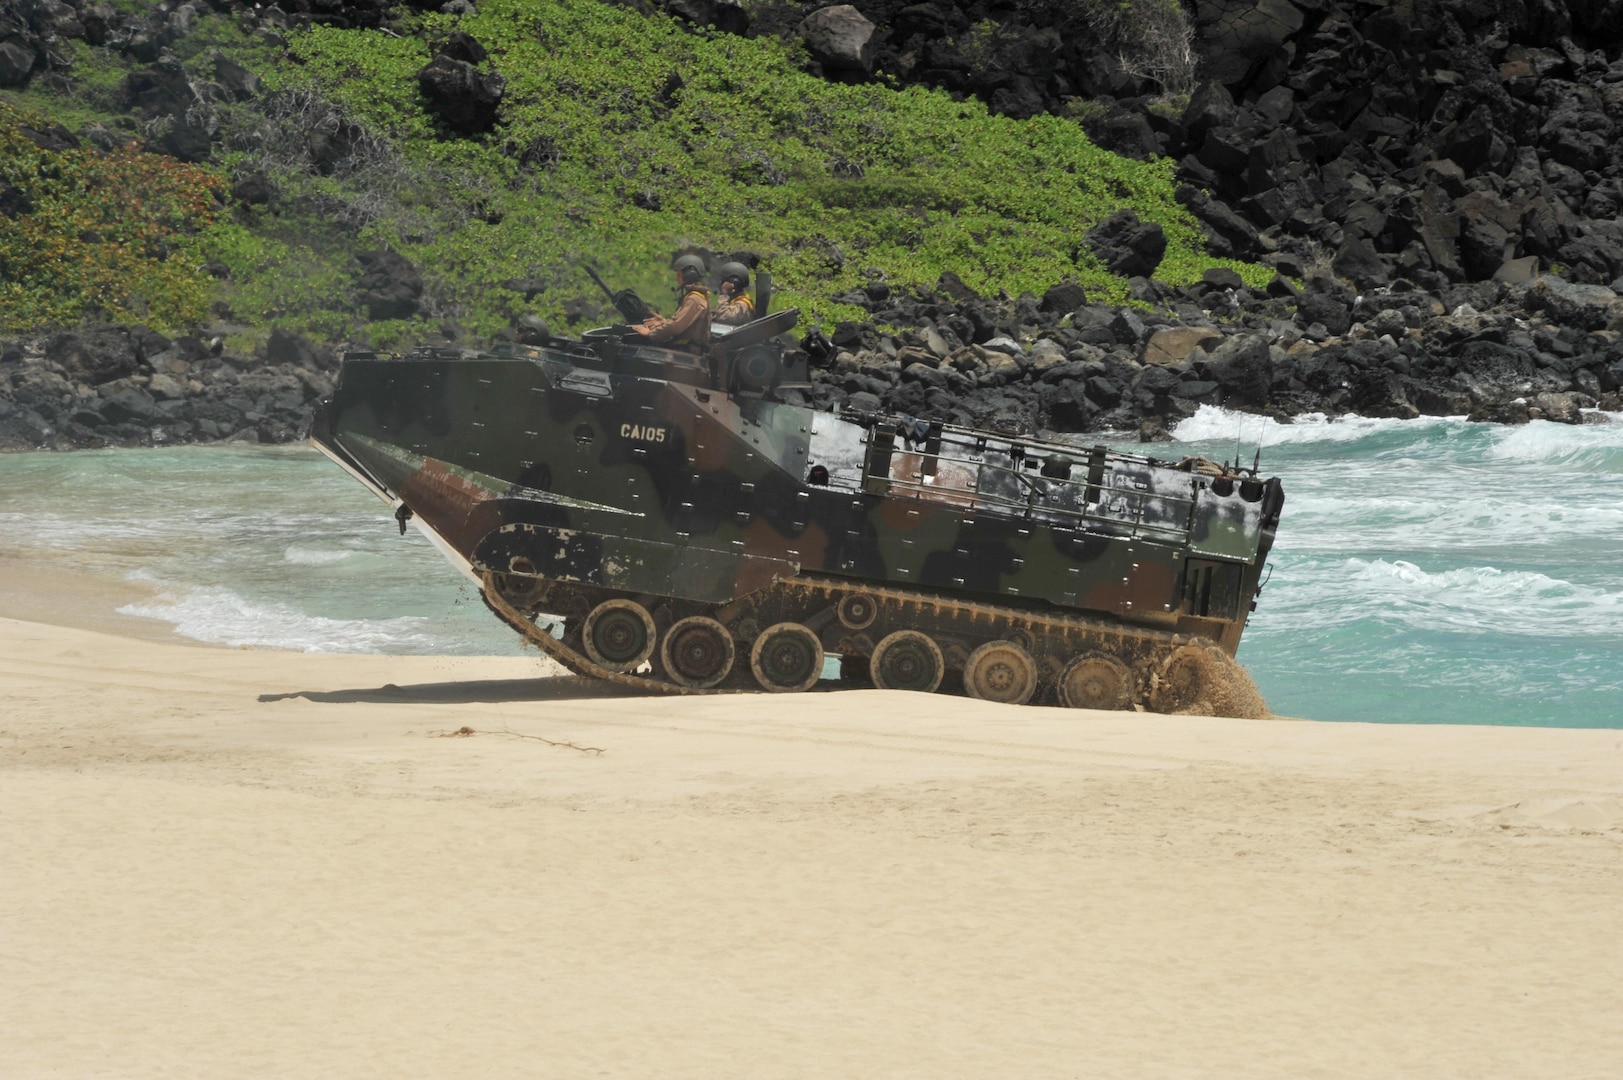 140728-N-UL721-362 MARINE CORPS BASE HAWAII (July 28, 2014) U.S. Marines drive an amphibious assault vehicle ashore during a simulated beach assault as part of Rim of the Pacific (RIMPAC) Exercise 2014. Twenty-two nations, 49 ships, six submarines, more than 200 aircraft and 25,000 personnel are participating in RIMPAC from June 26 to Aug. 1, in and around the Hawaiian Islands and Southern California. The world's largest maritime exercise, RIMPAC provides a unique training opportunity that helps participants foster and sustain the cooperative relationships that are critical to ensuring the safety of sea lanes and security on the world's oceans. RIMPAC 2014 is the 24th exercise in the series that began in 1971. (U.S. Navy photo by Mass Communication Specialist 2nd Class Corey T. Jones/Released)